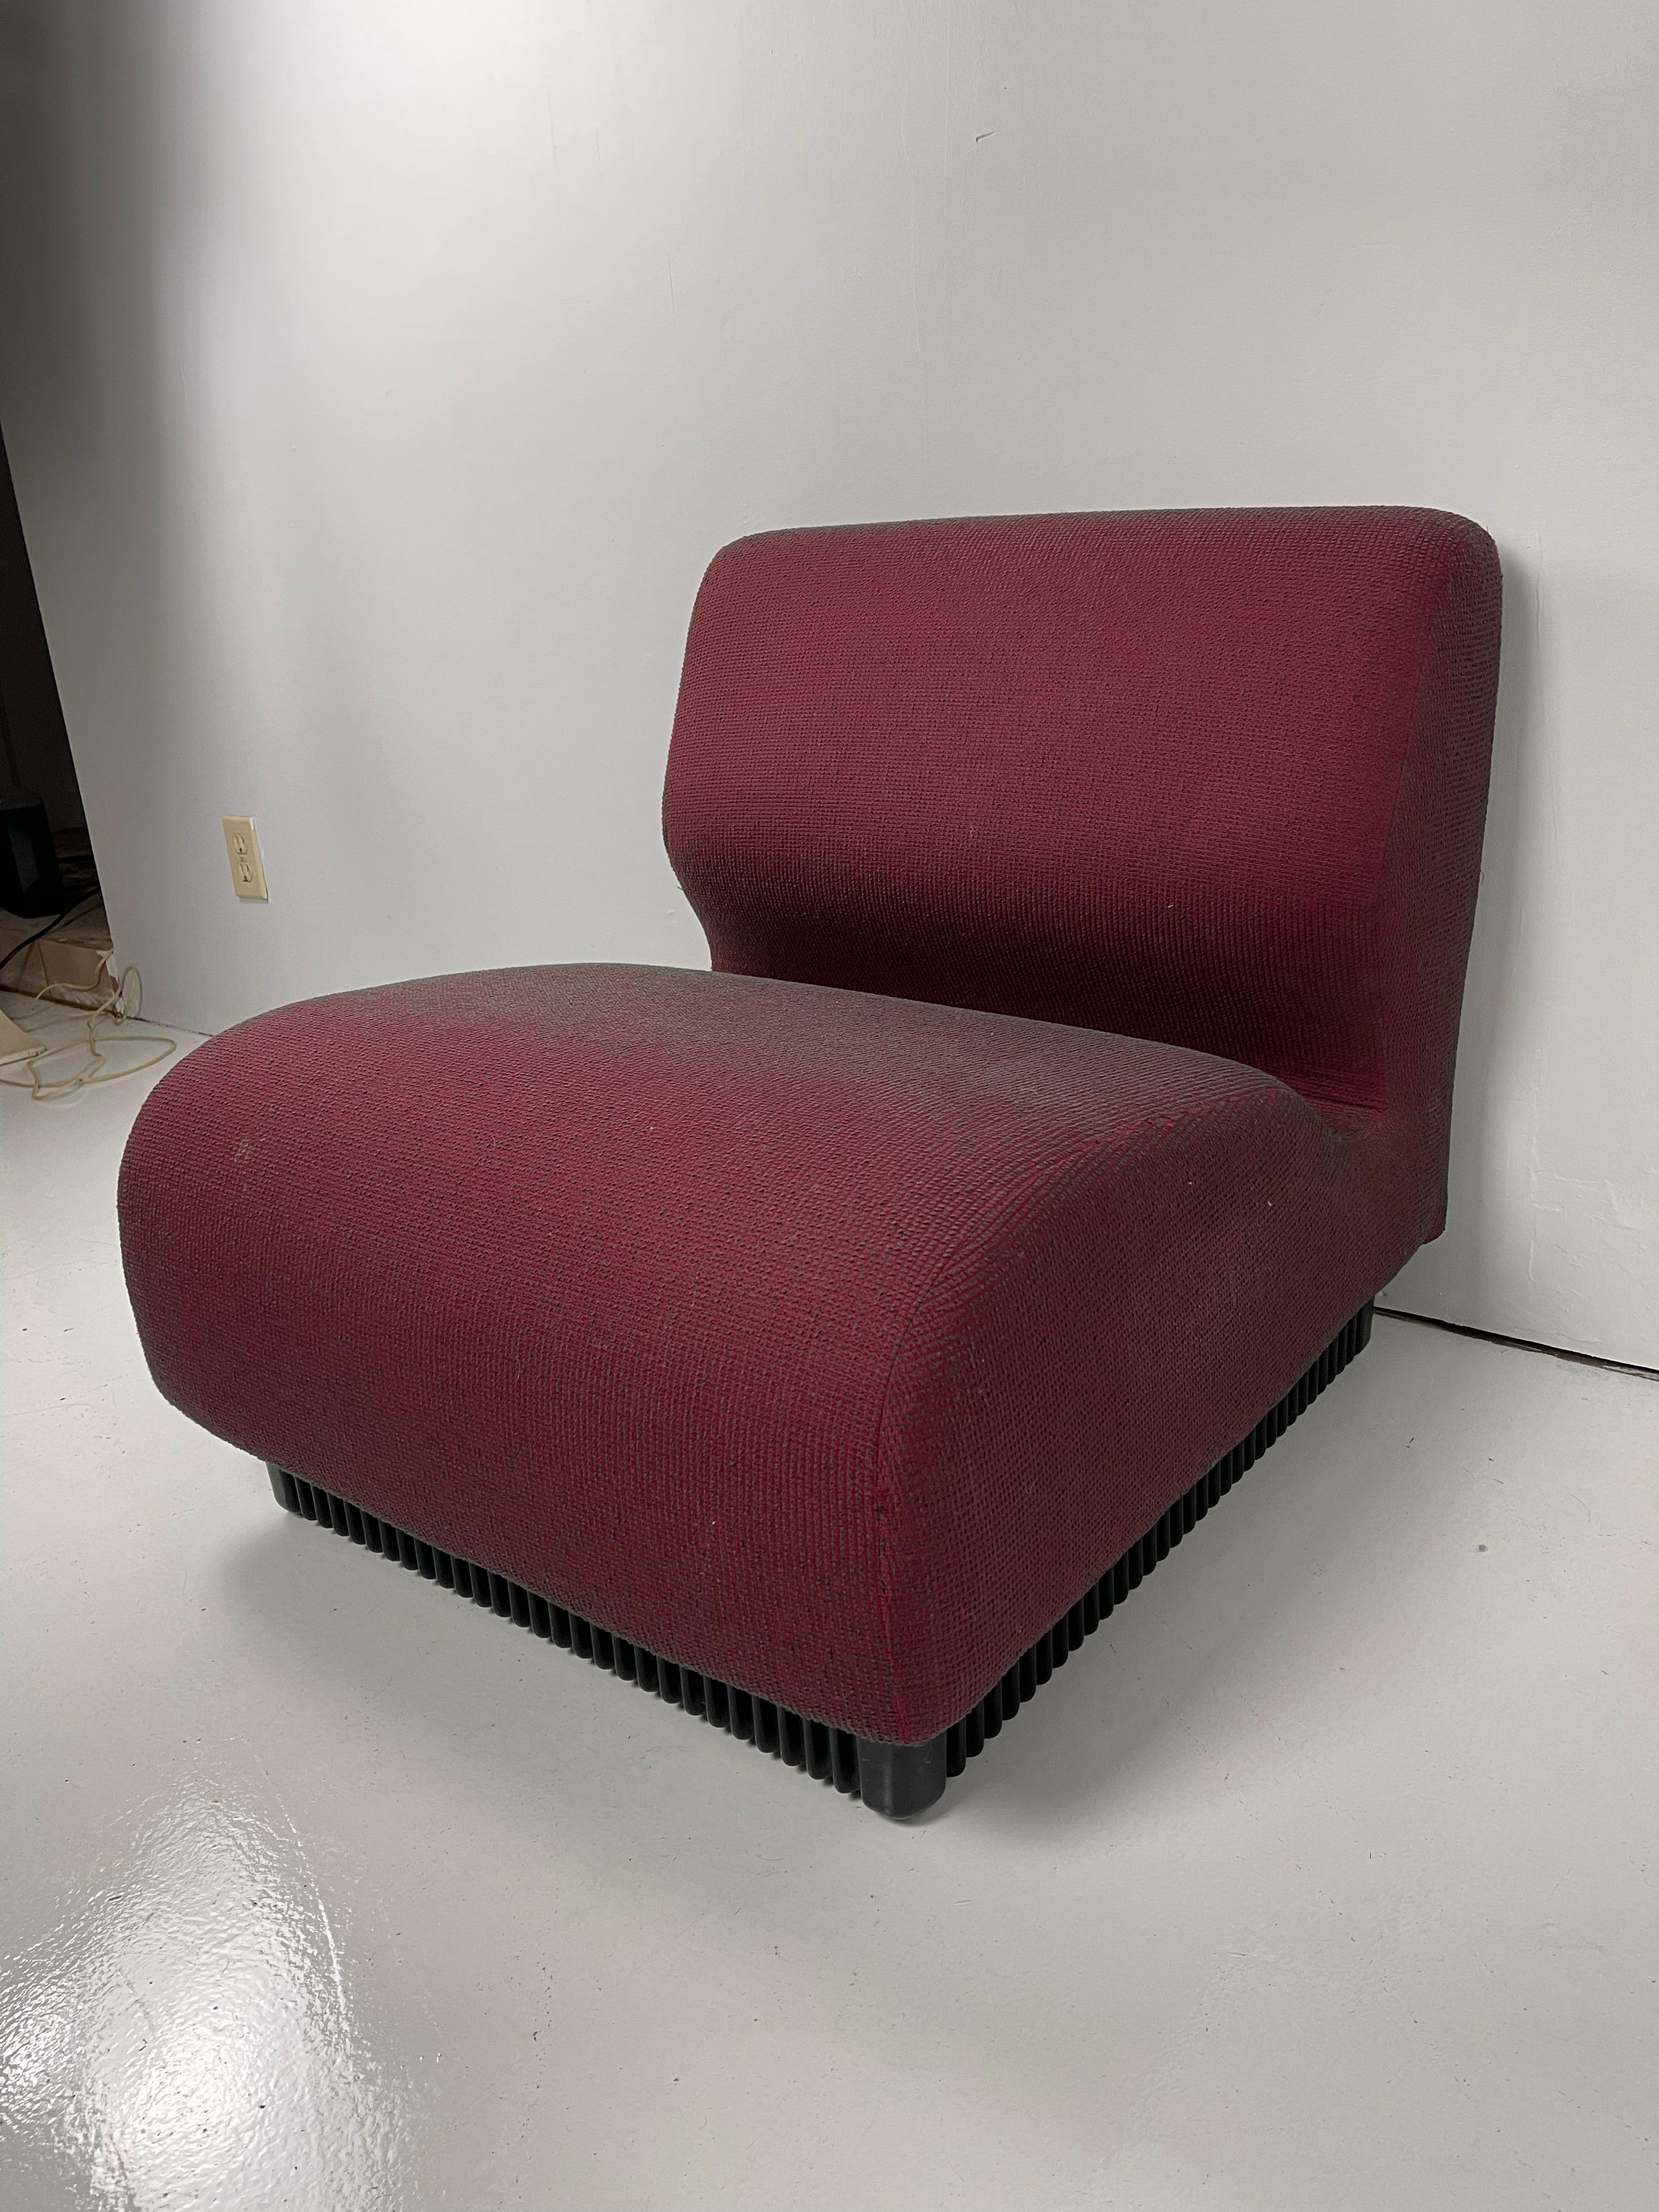 Modular slipper chairs with molded plastic base in a burgundy wool blend upholstery.